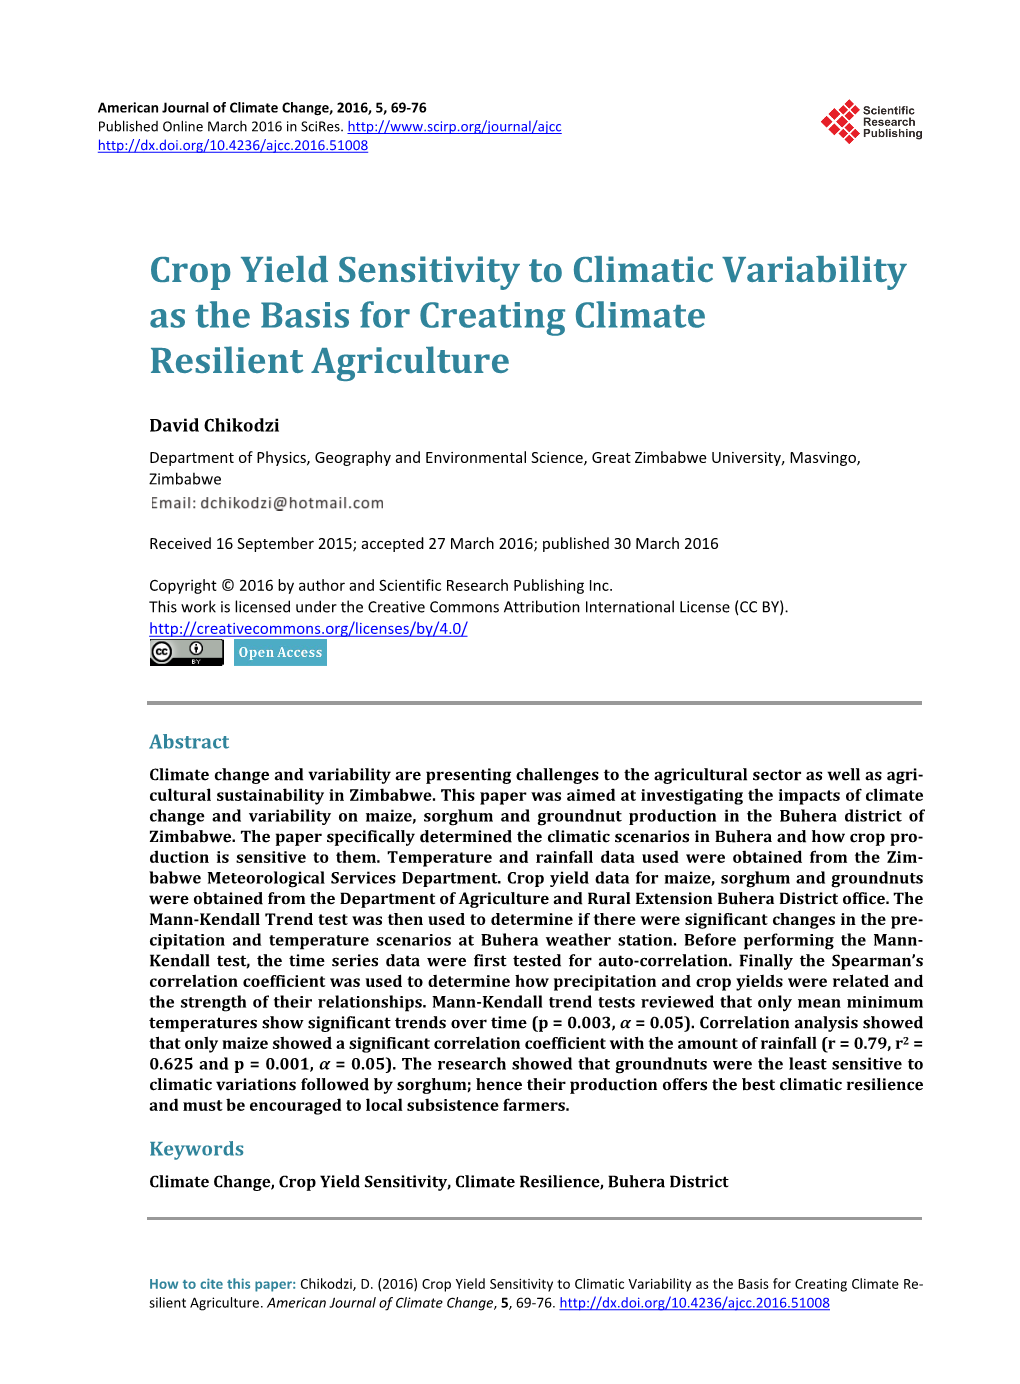 Crop Yield Sensitivity to Climatic Variability As the Basis for Creating Climate Resilient Agriculture